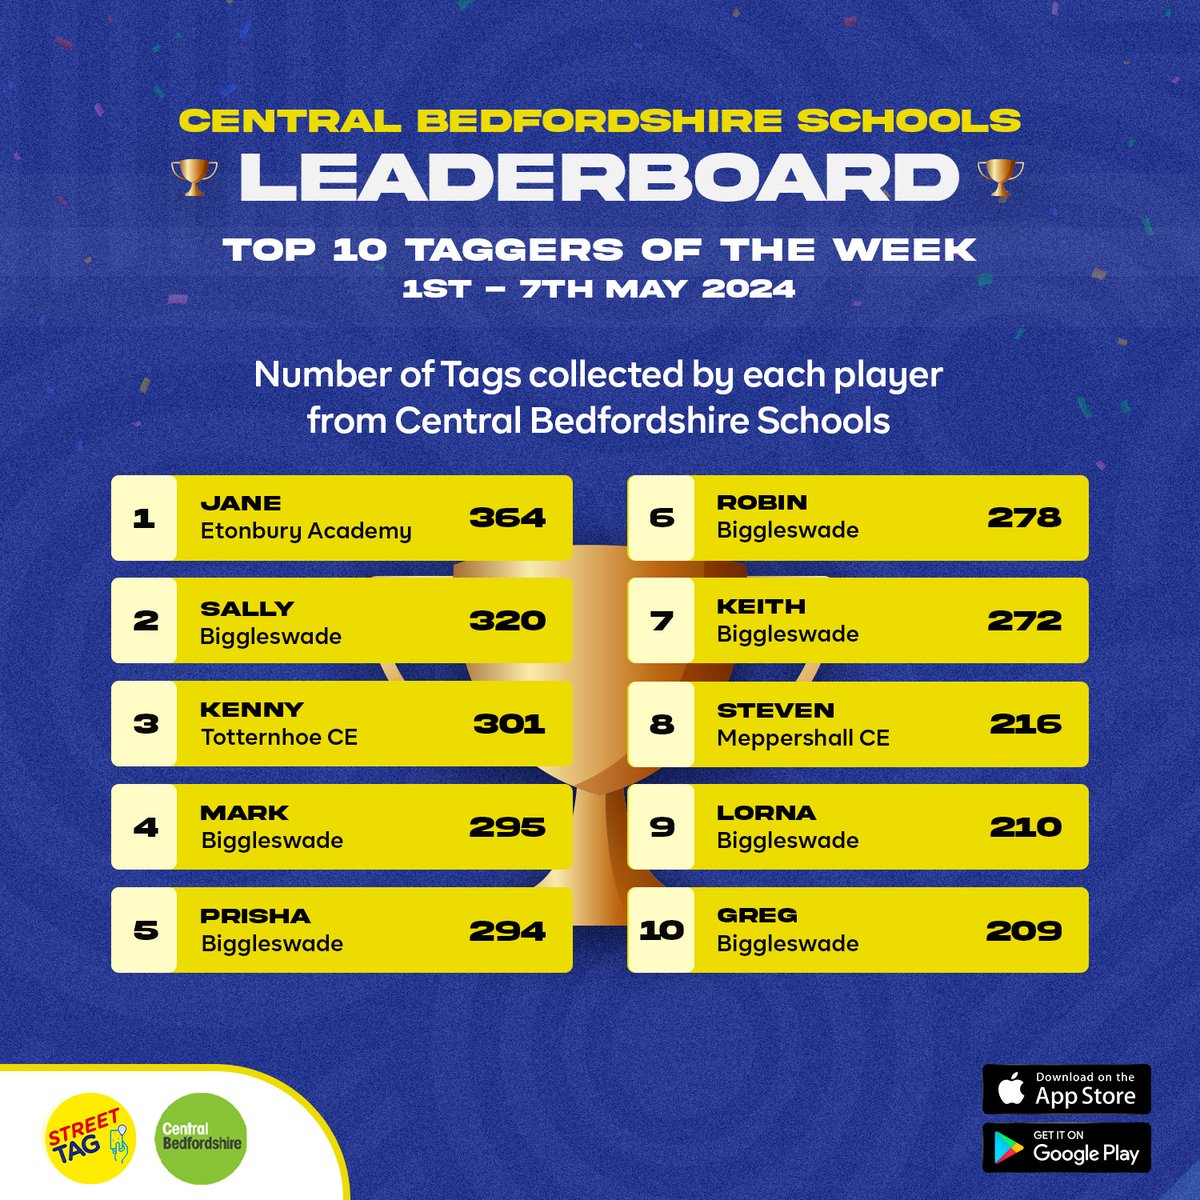 Jane at the summit!🌟 Sally drops; Kenny rises. Congratulations to the Top 10 Taggers of the Week in Central Bedfordshire Schools Leaderboard! Keep up the Fan-TAG-stic work! 💪 @letstalkcentral @BATnewsfeed @MeppershallCE @EtonburyAcademy @lva_info @TotternhoeCE